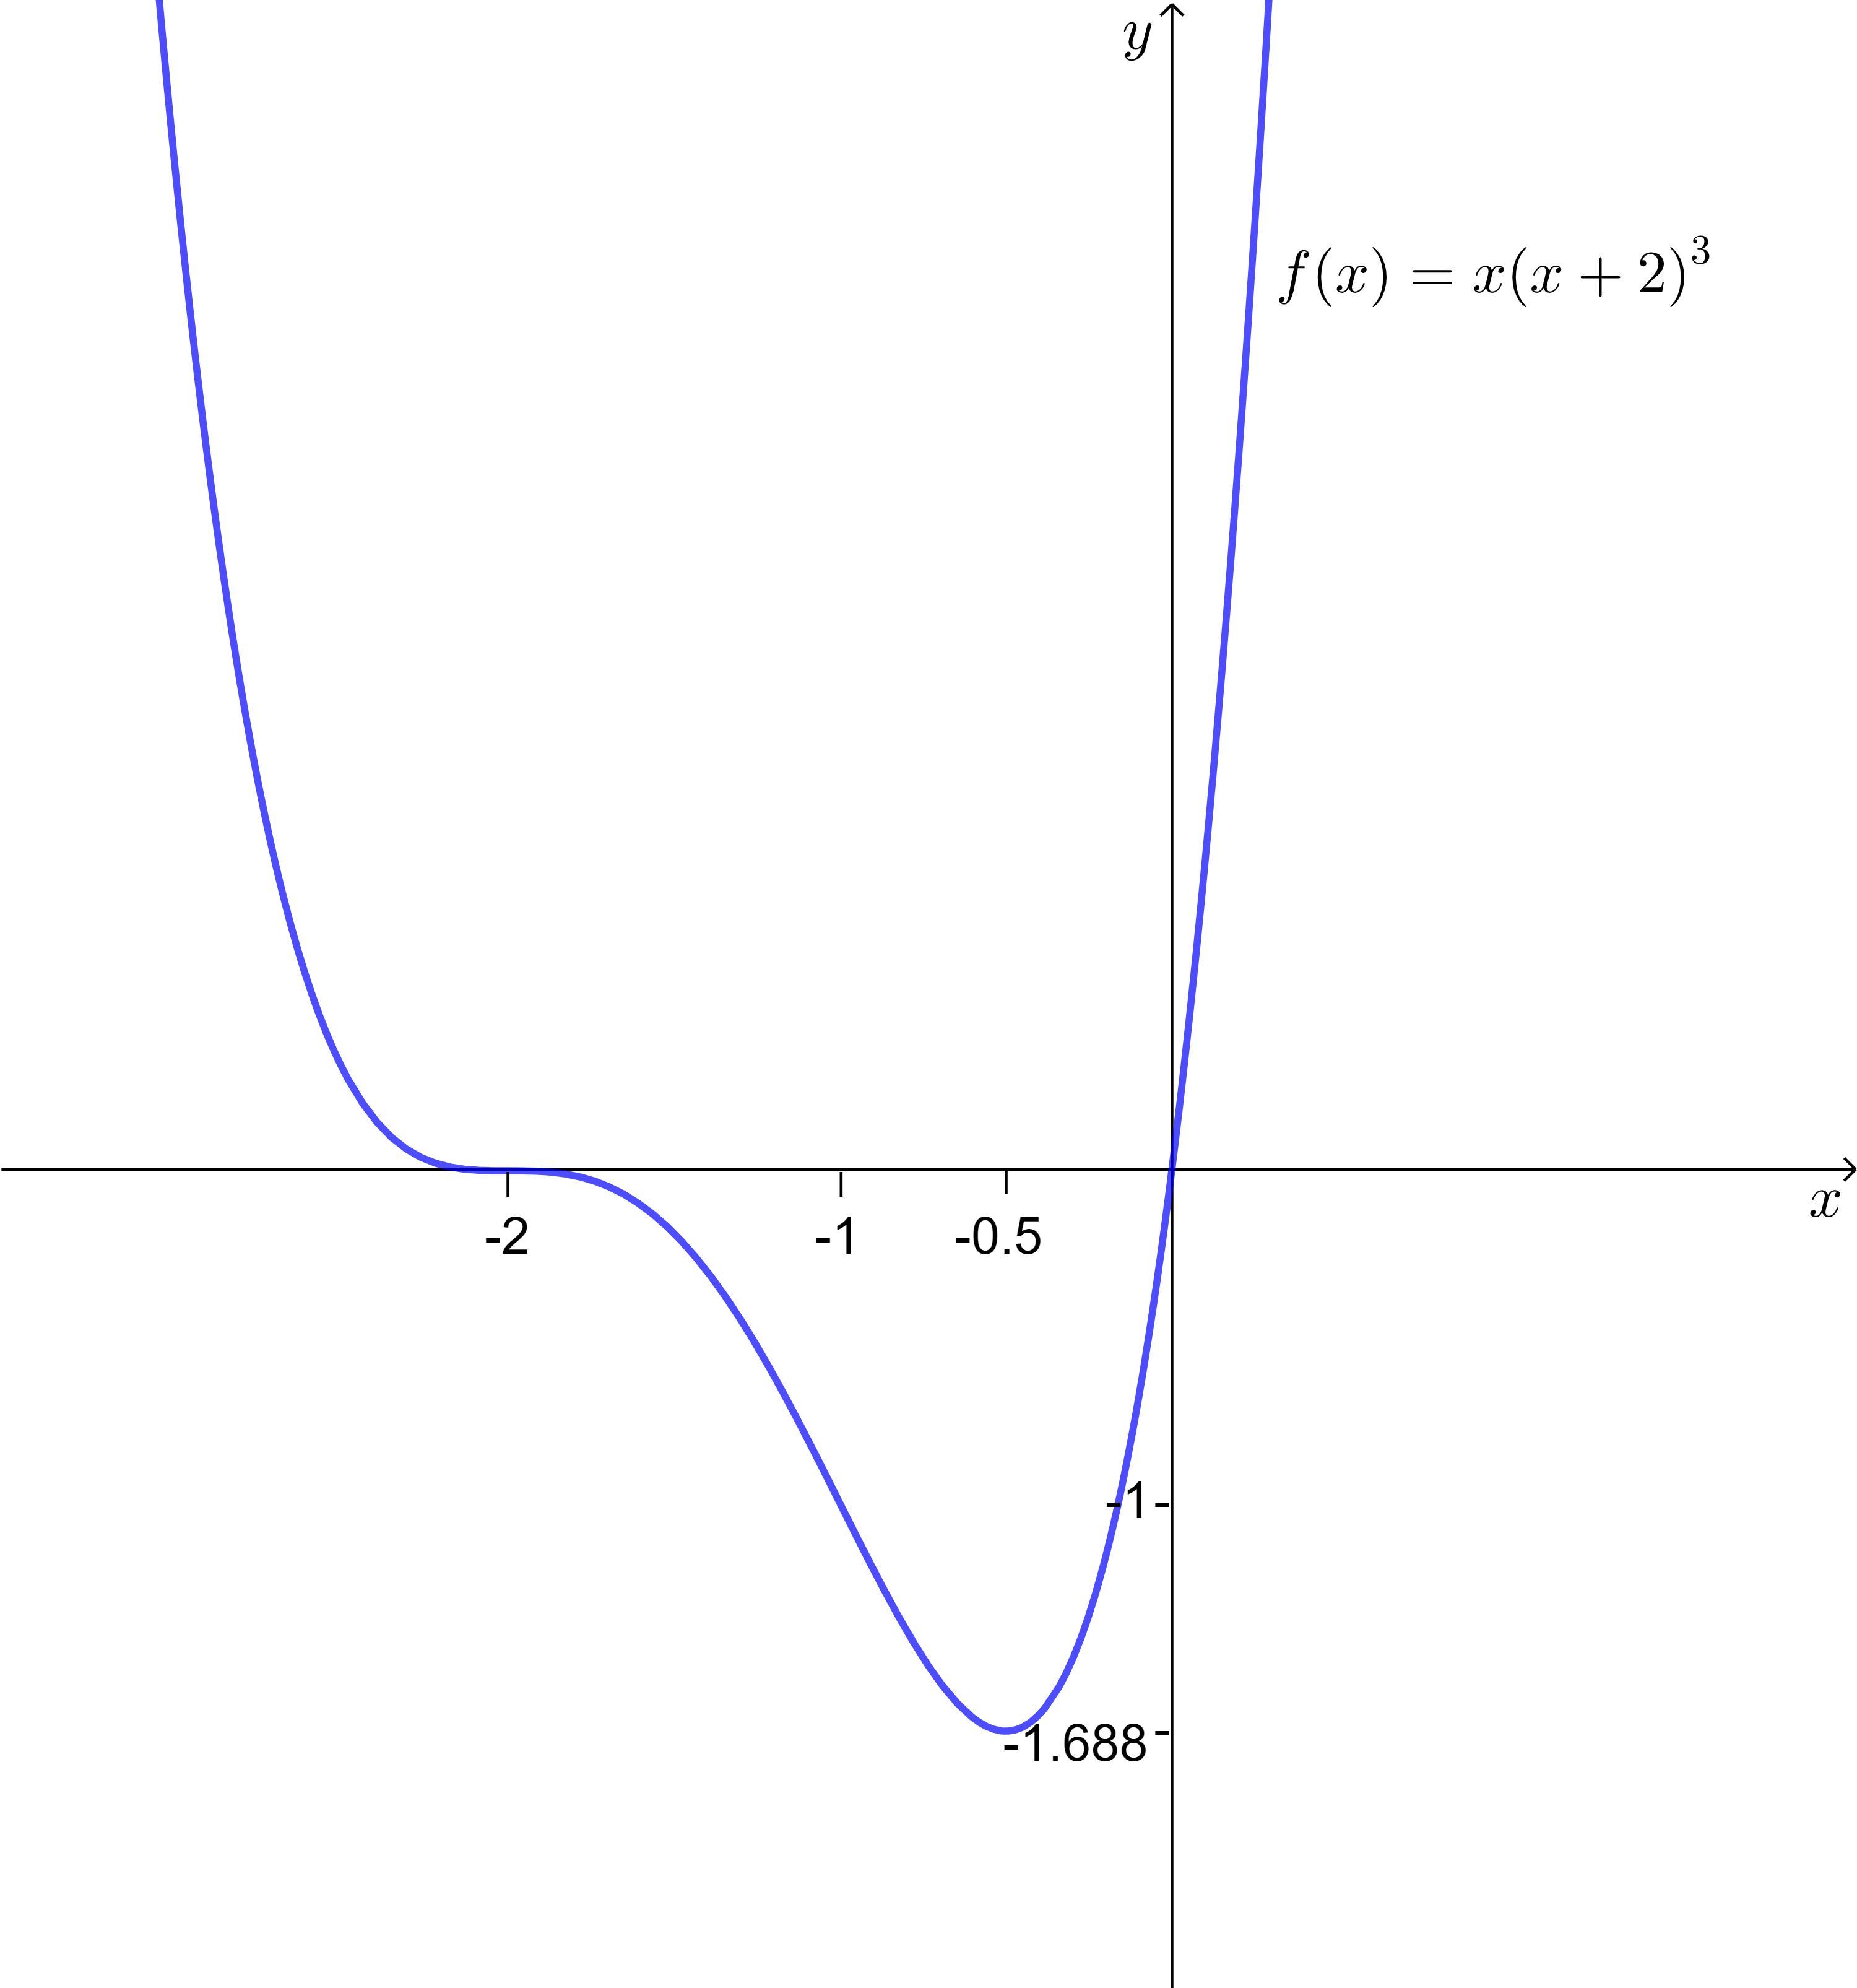 The Function F(x) = X(x+2)^3 Has The First Derivative F'(x) = (4x+2)(x+2)^2 And Second Derivative F"(x)